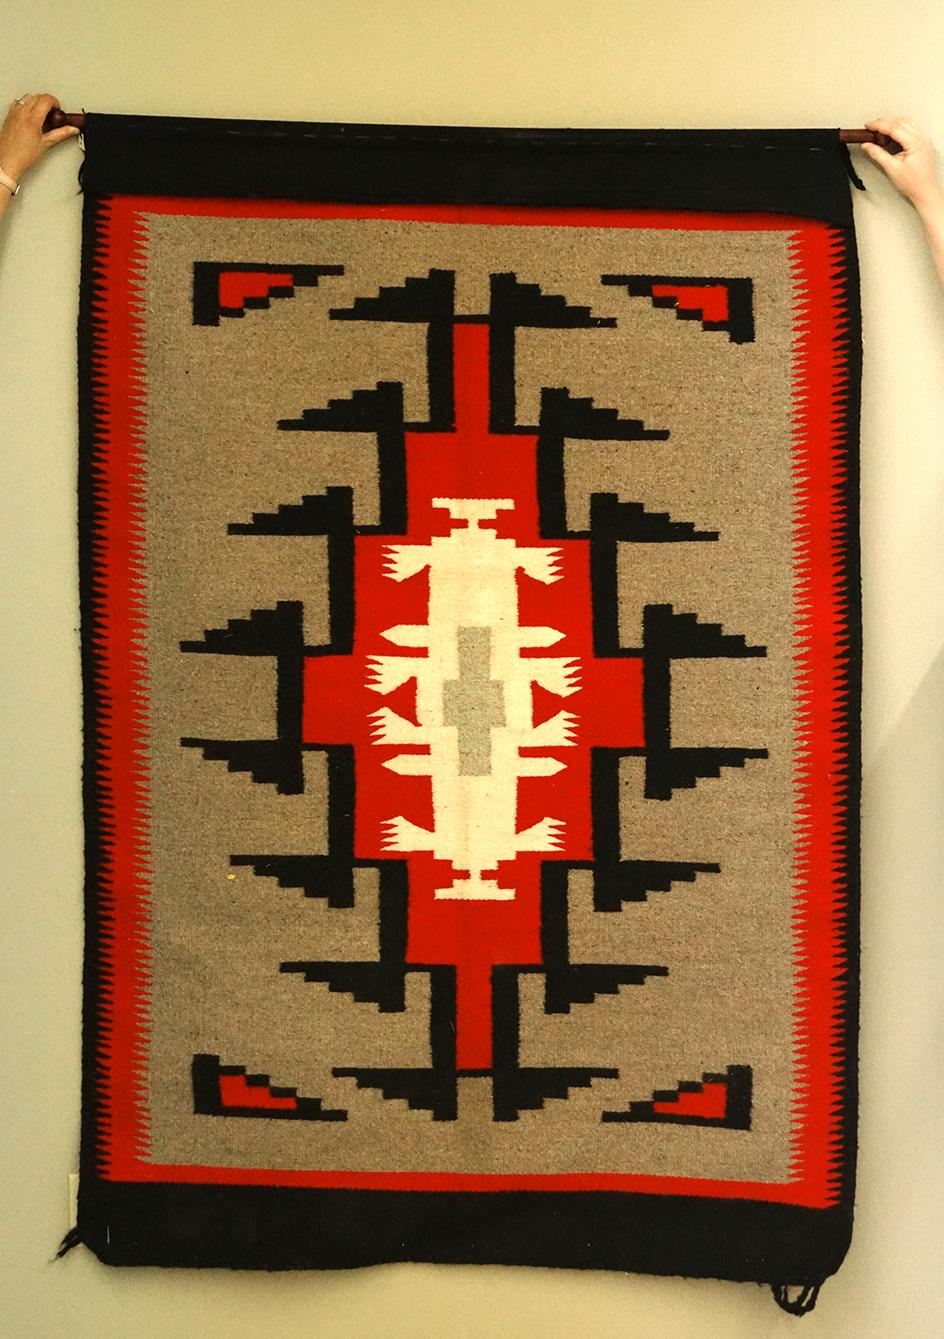 69" by 45" nicely woven large Navajo rug - excellent condition - makes a beautiful wall hanging.